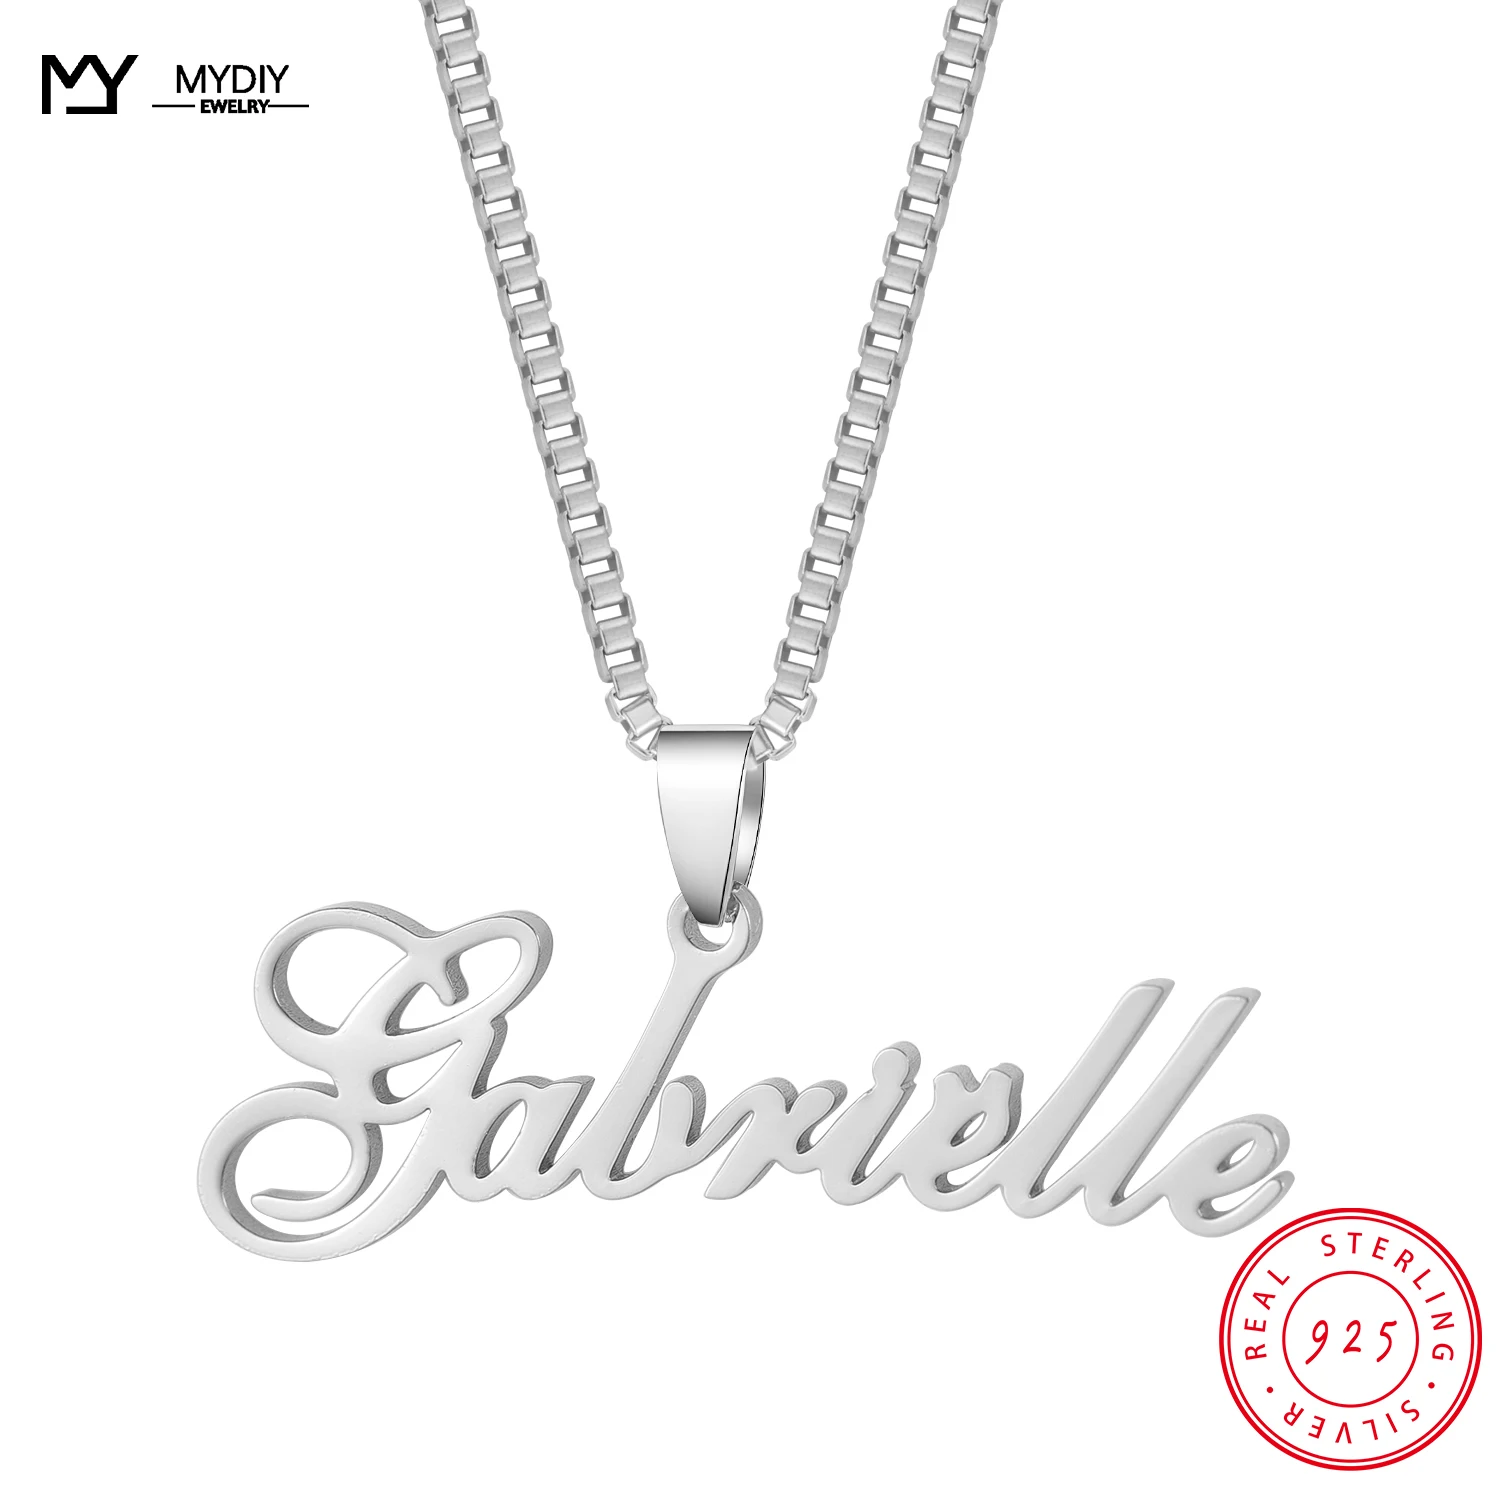 MYDIY 925 Sterling Silver Customized Name Necklace For Girlfriend, Family Gift Exquisite Pendant Jewelry 2021 Trend play house toys our happy family theme villa suit girl child doll multicolor plastic 2 4 years girls 2021